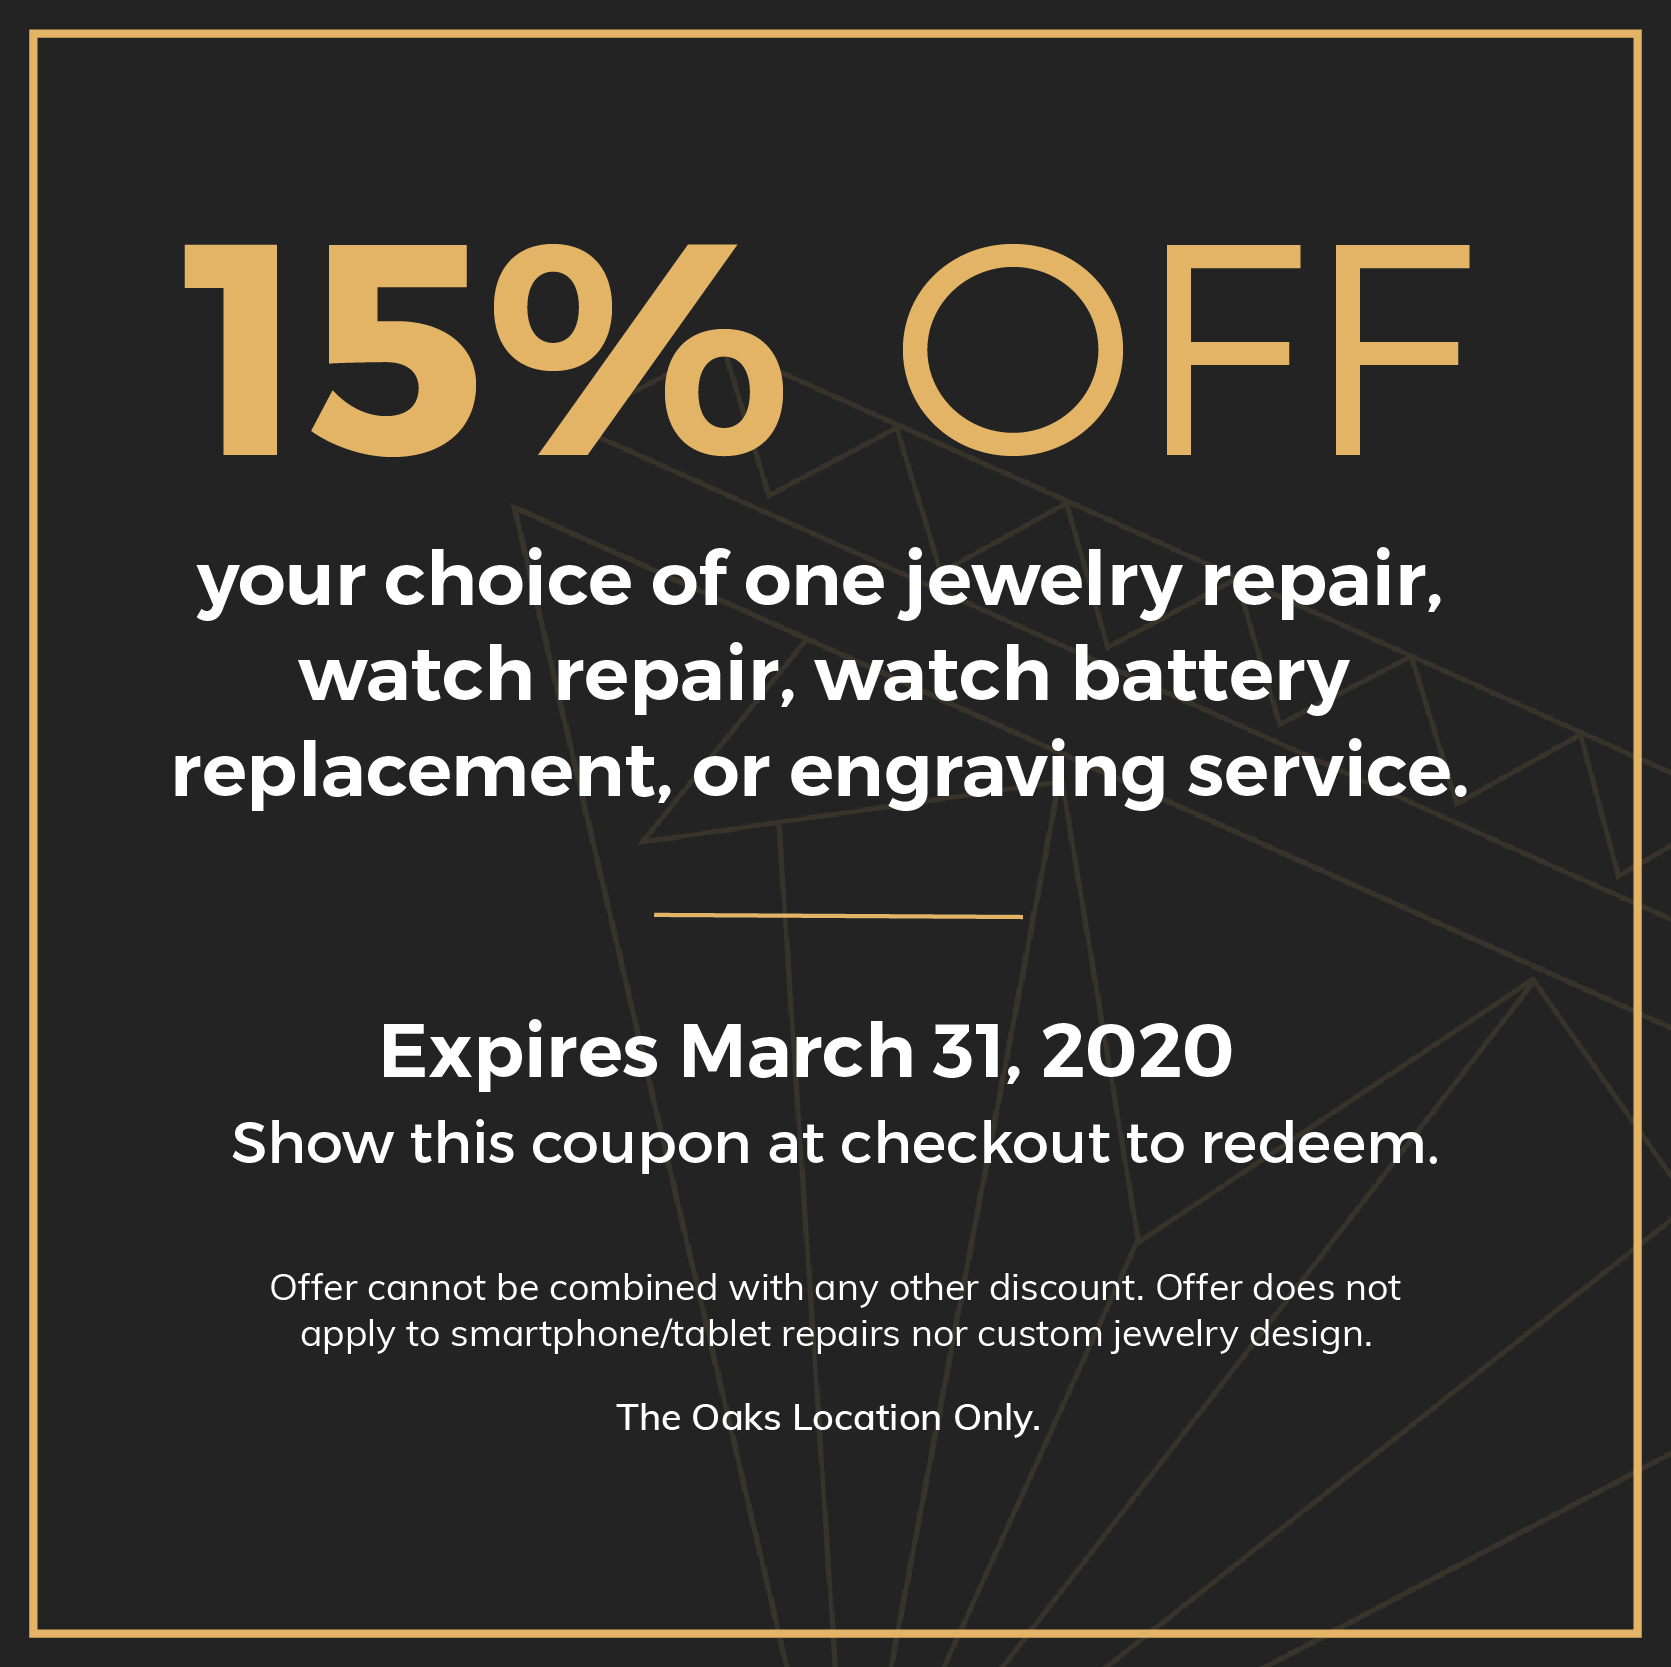 15% OFF. your choice of one jewelry repair, watch repair, watch battery replacement, or engraving service. Expires March 31, 2020. Show this coupon at checkout to redeem. Offer cannot be combined with any other discount. Offer does not apply to smartphone/tablet repairs nor custom jewelry design. The Oaks Location Only.